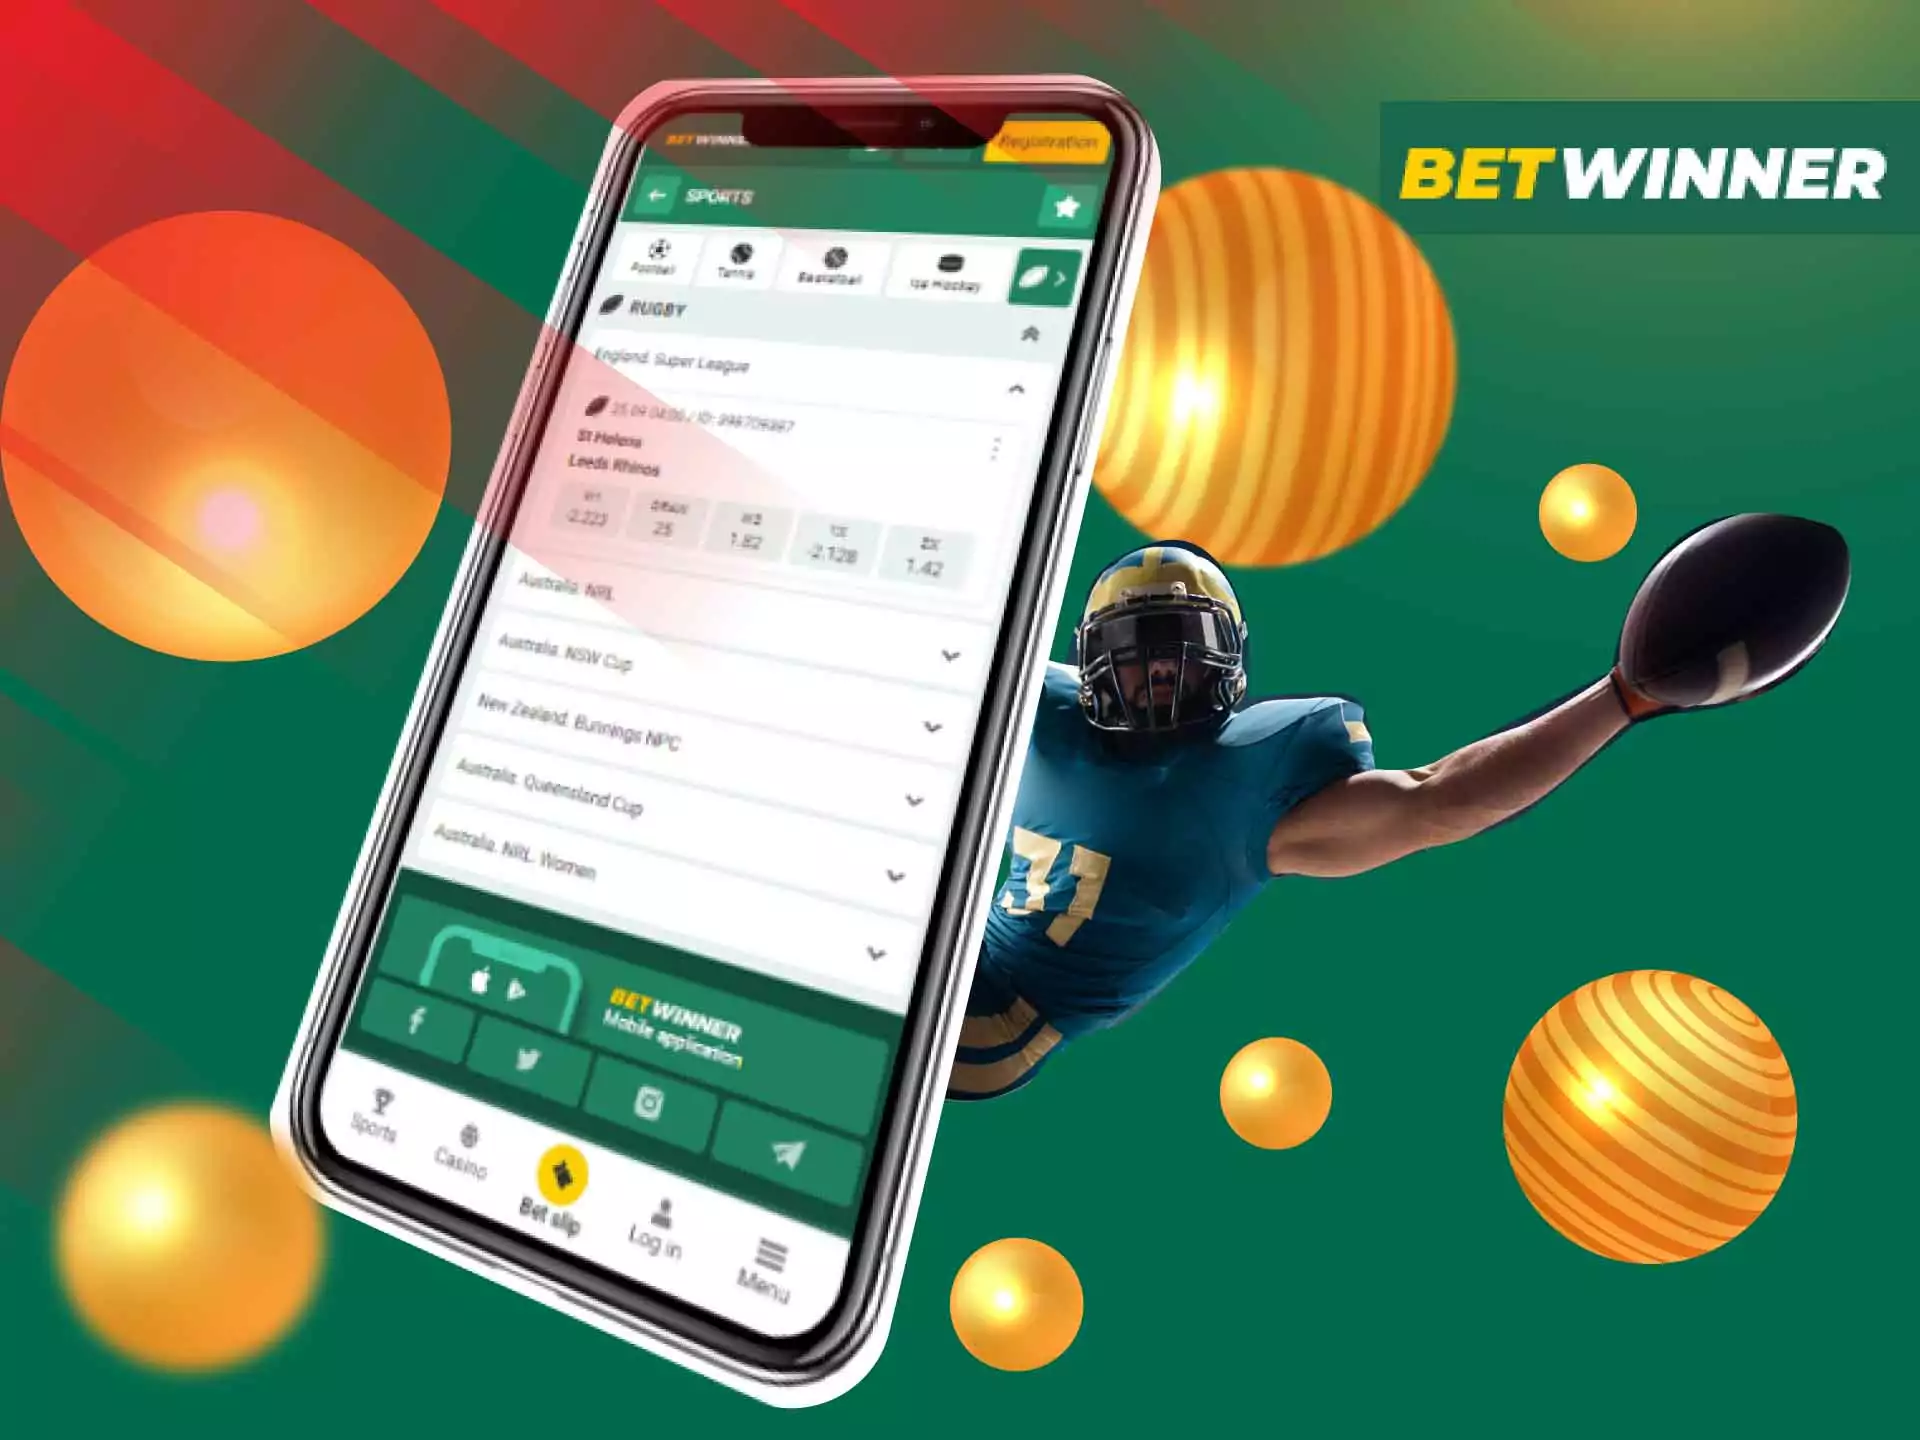 Choose a rugby match and place a bet on your team.